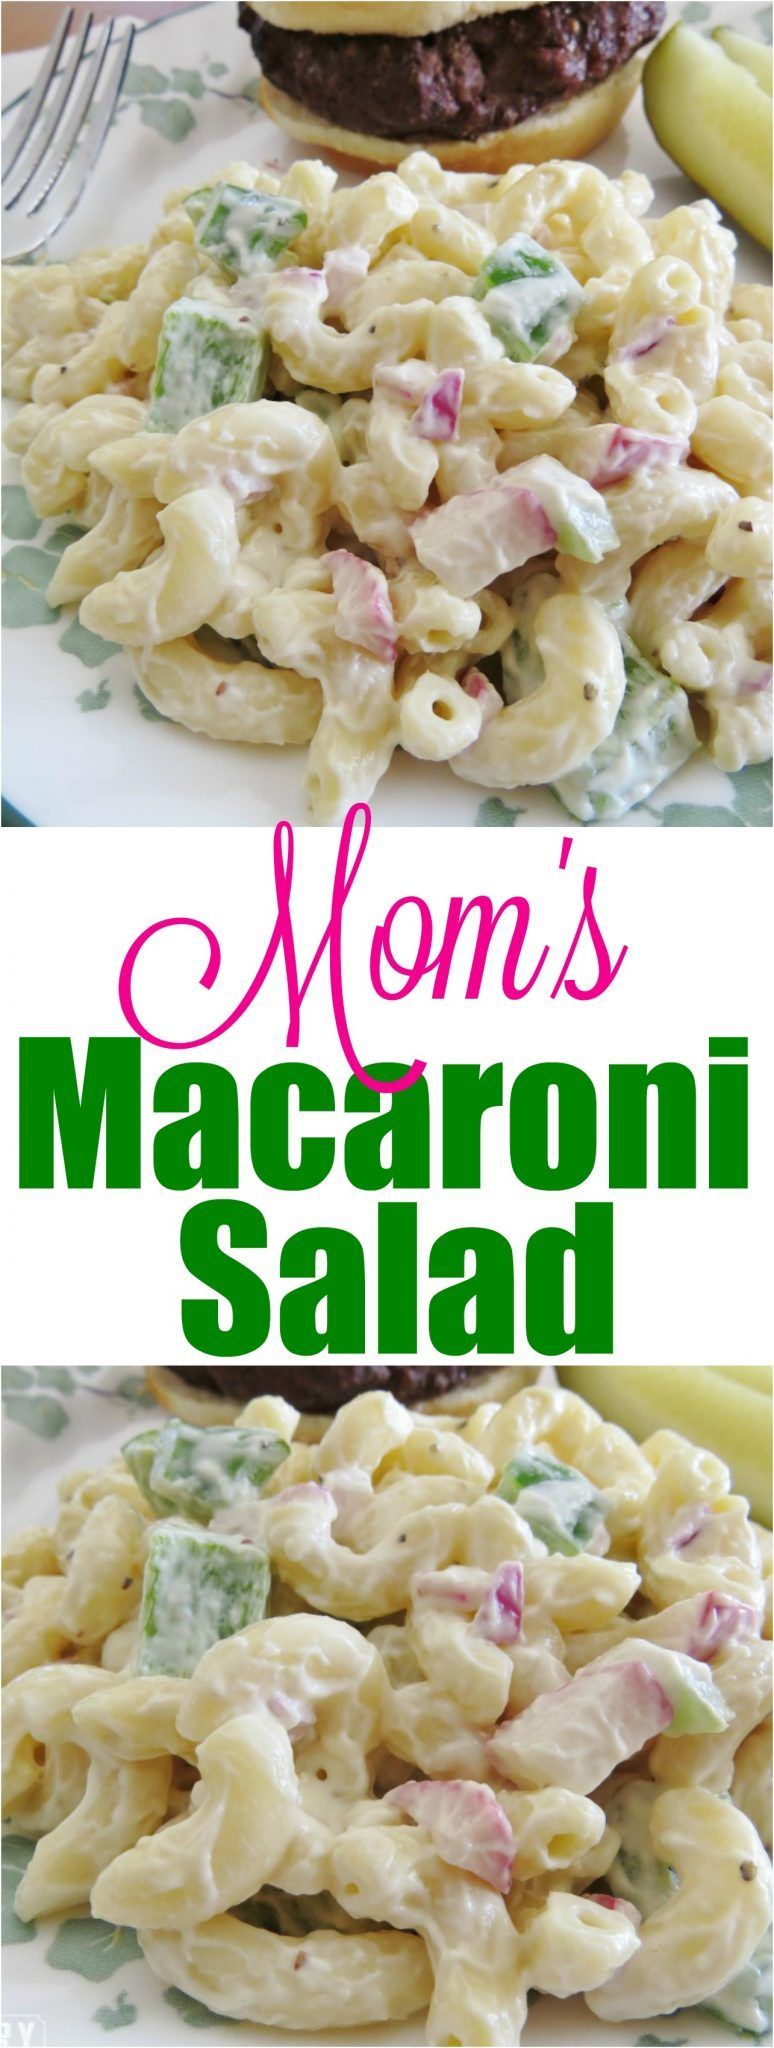 Mom's Macaroni Salad recipe from The Country Cook -   22 macaroni salad recipes ideas